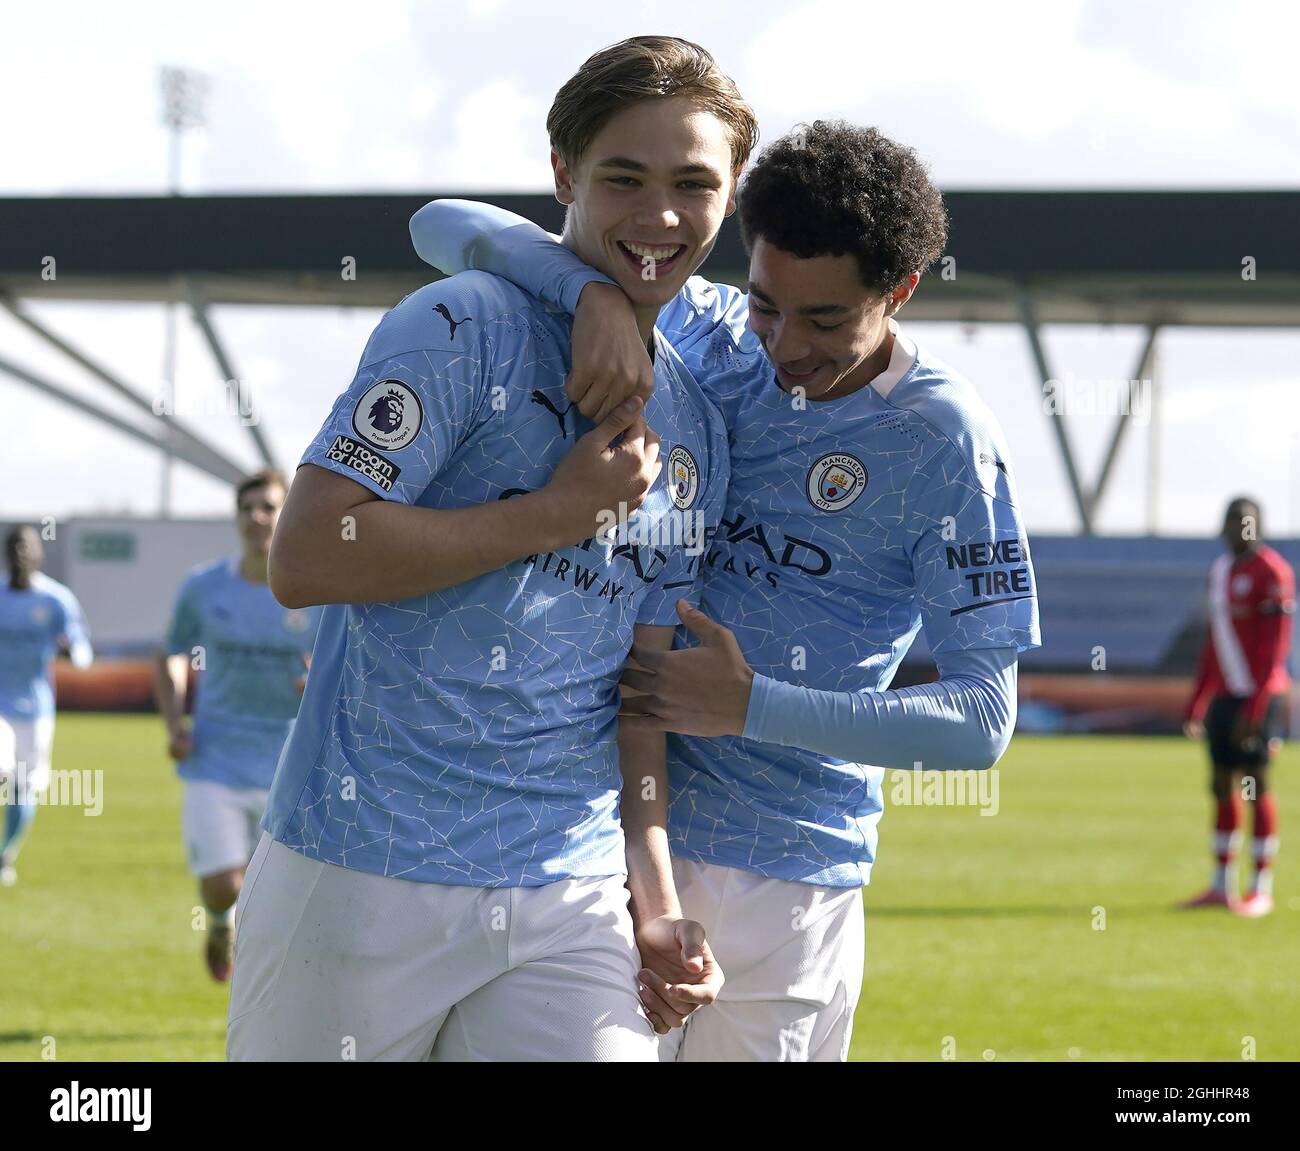 Callum Doyle of Manchester City celebrates after scoring during the Professional Development League match at Academy Stadium, Manchester. Picture date: 15th March 2021. Picture credit should read: Andrew Yates/Sportimage via PA Images Stock Photo